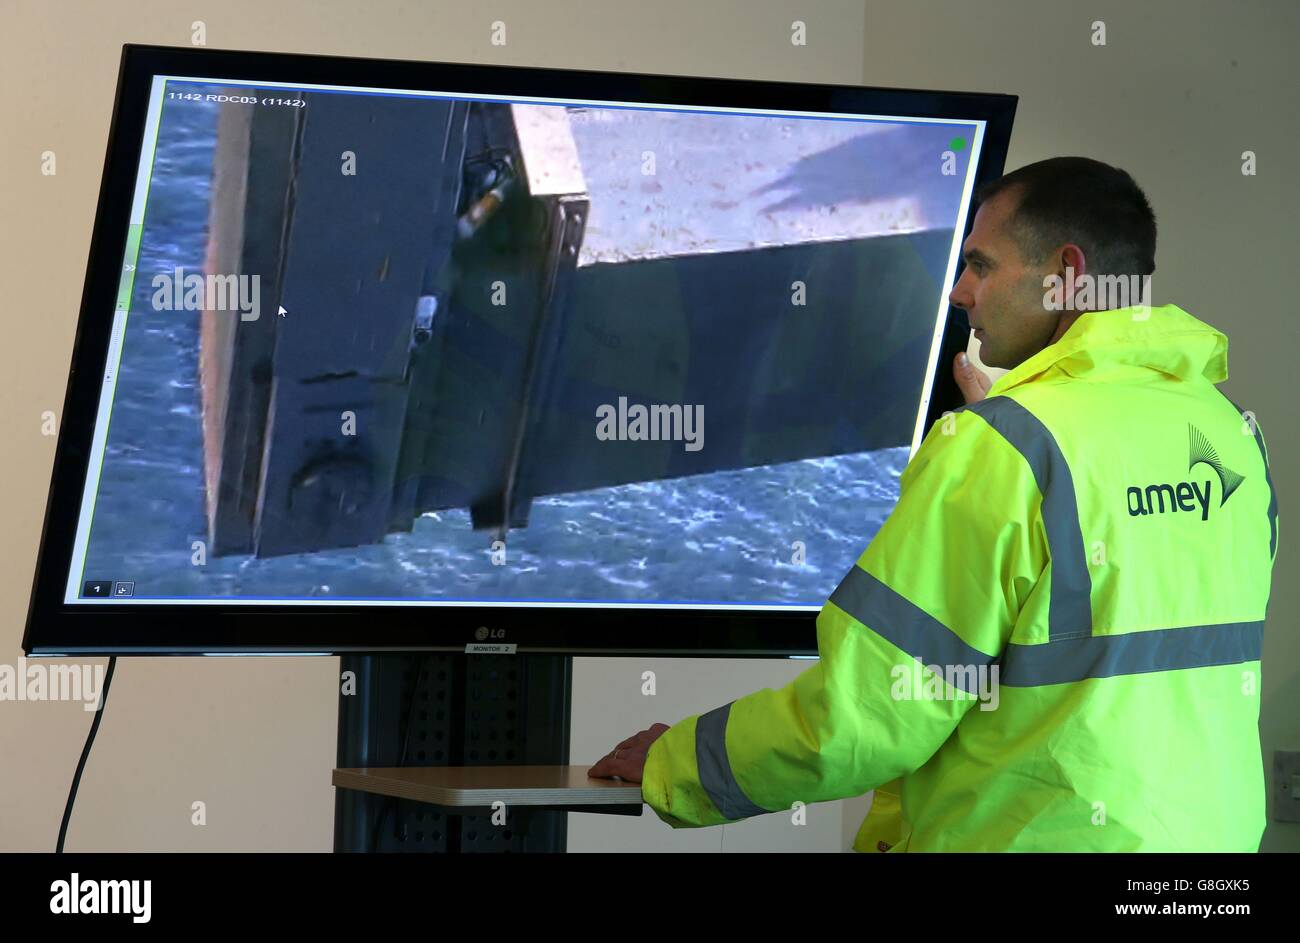 Amey chartered engineer Mark Arndt, who is in charge of the repair to the Forth Road Bridge, views a TV monitor showing a live picture of the crack discovered last week. Transport Minister Derek Mackay said that the repair remains 'on track' despite high winds which have hampered the efforts of engineers. Stock Photo